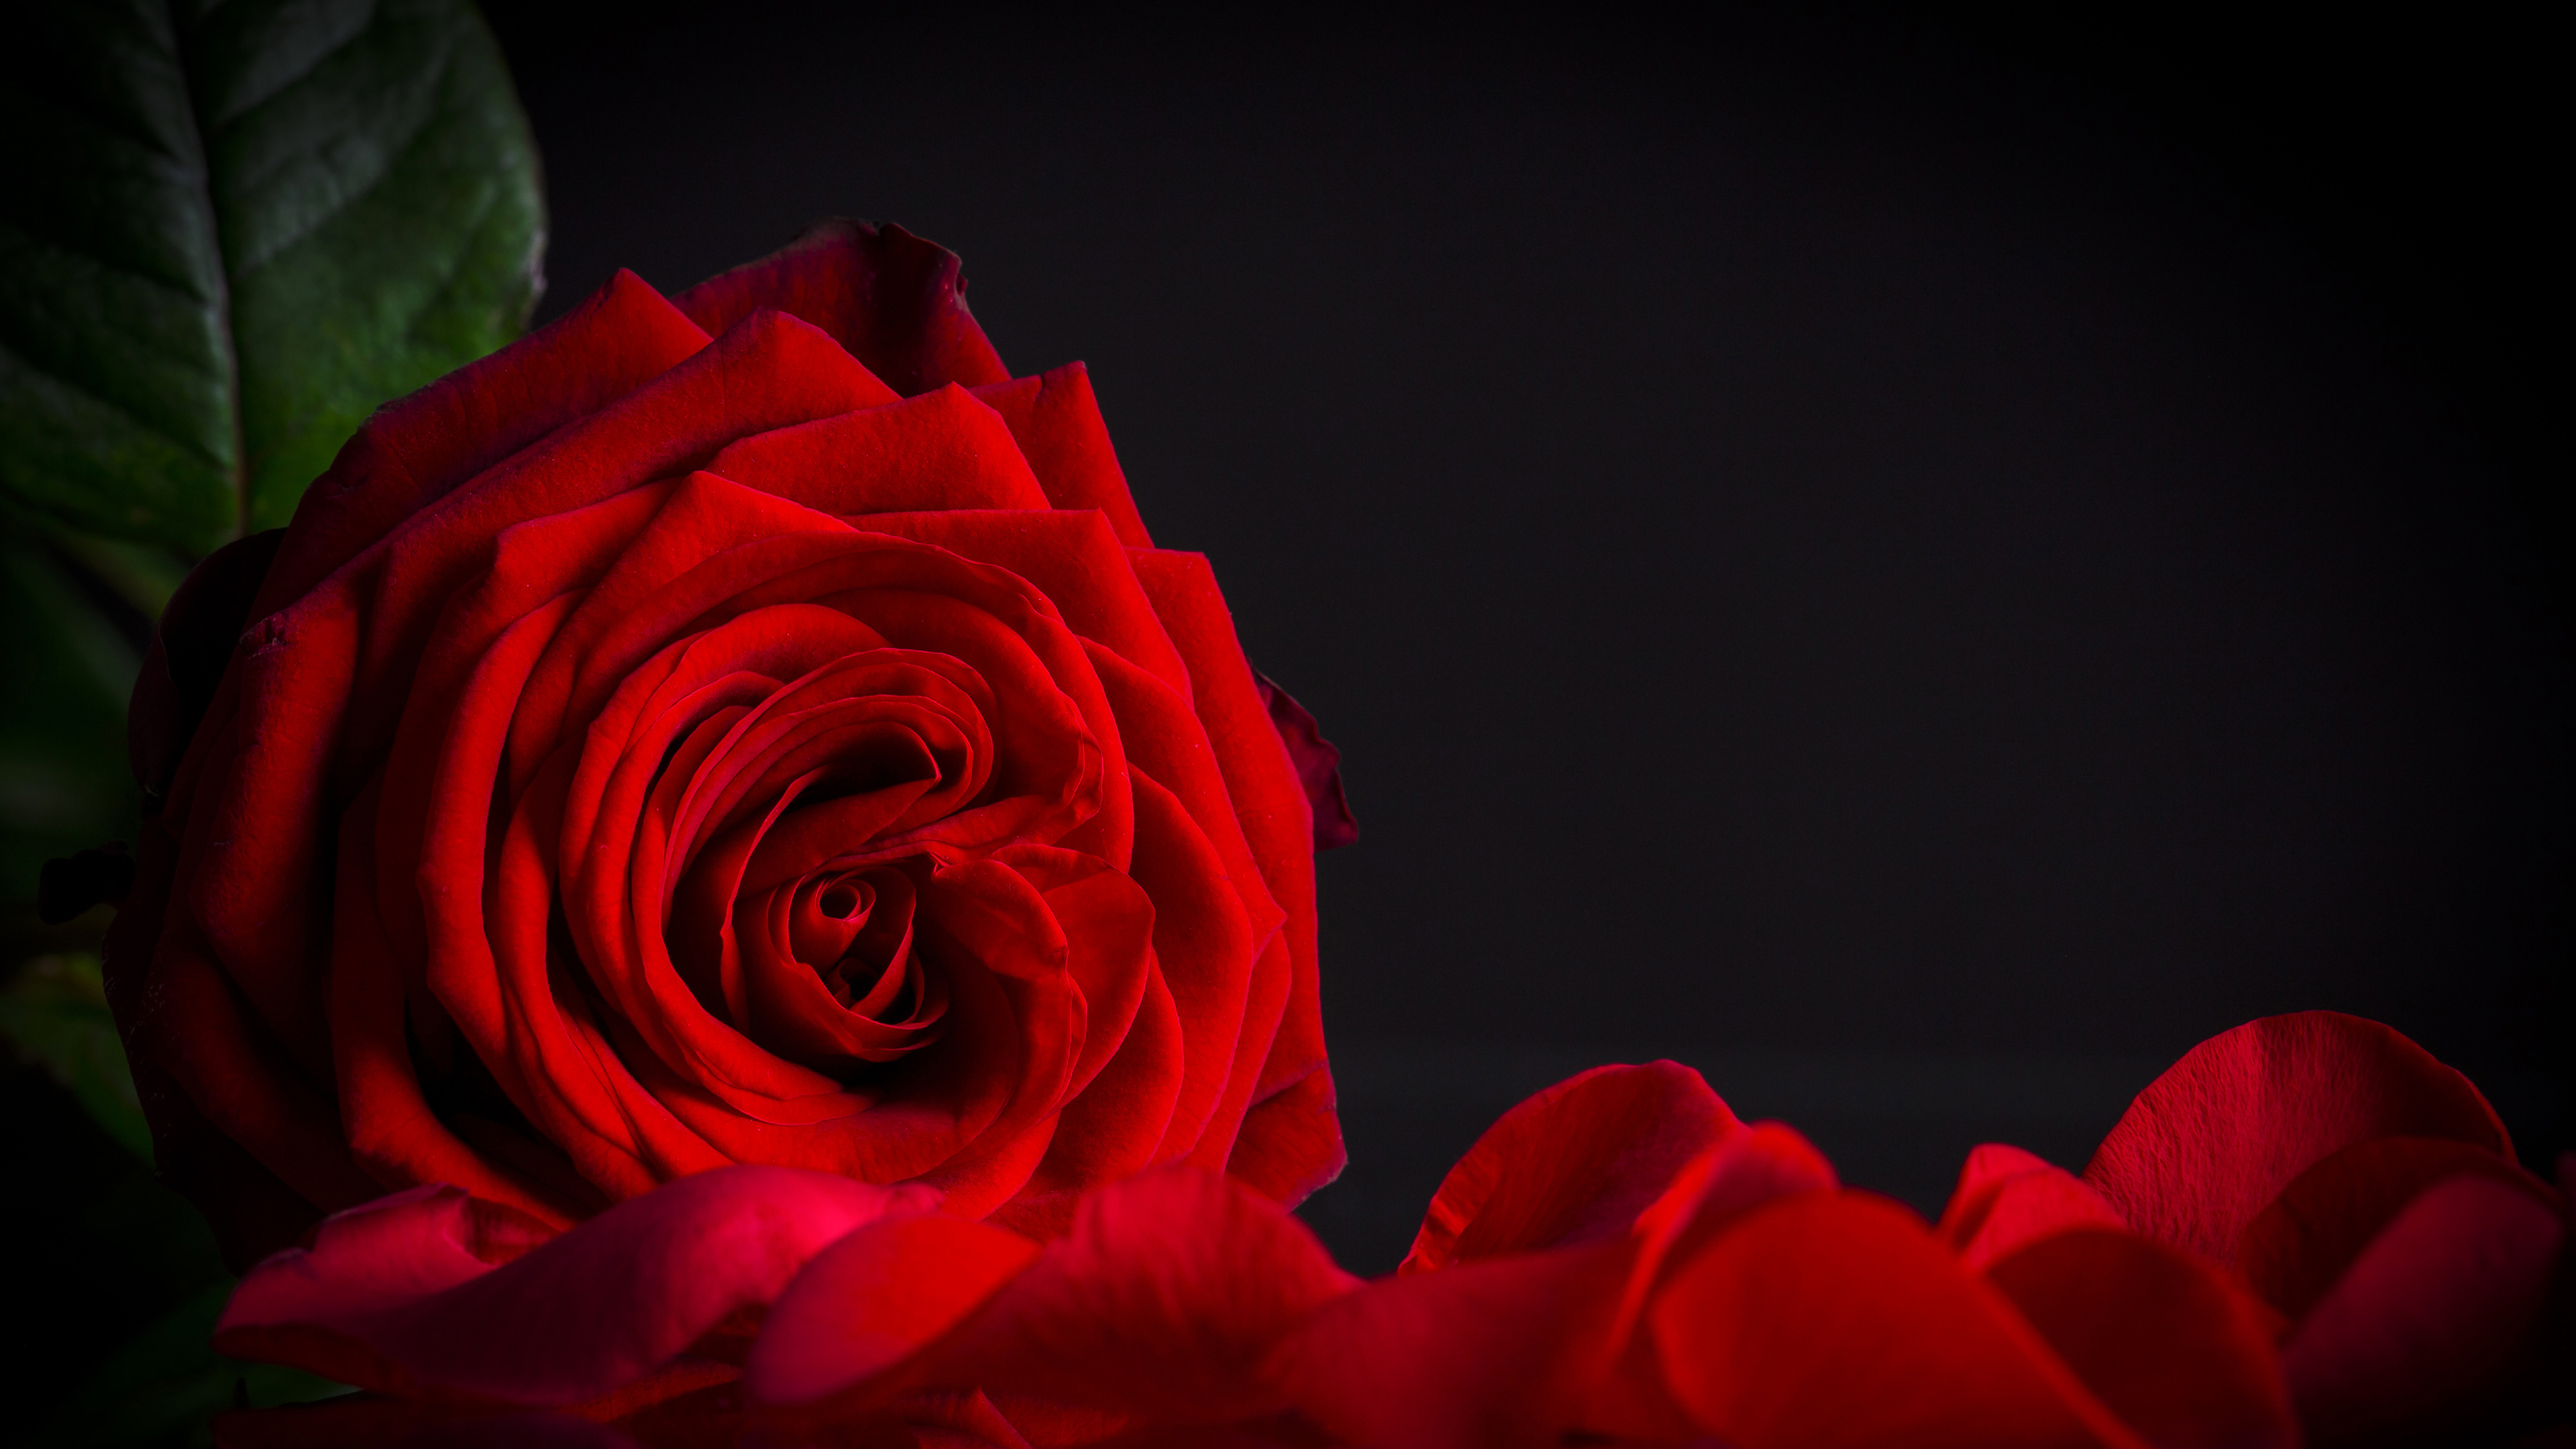 Top 25 Pictures Of Red Roses - #13 - with Black Background - HD